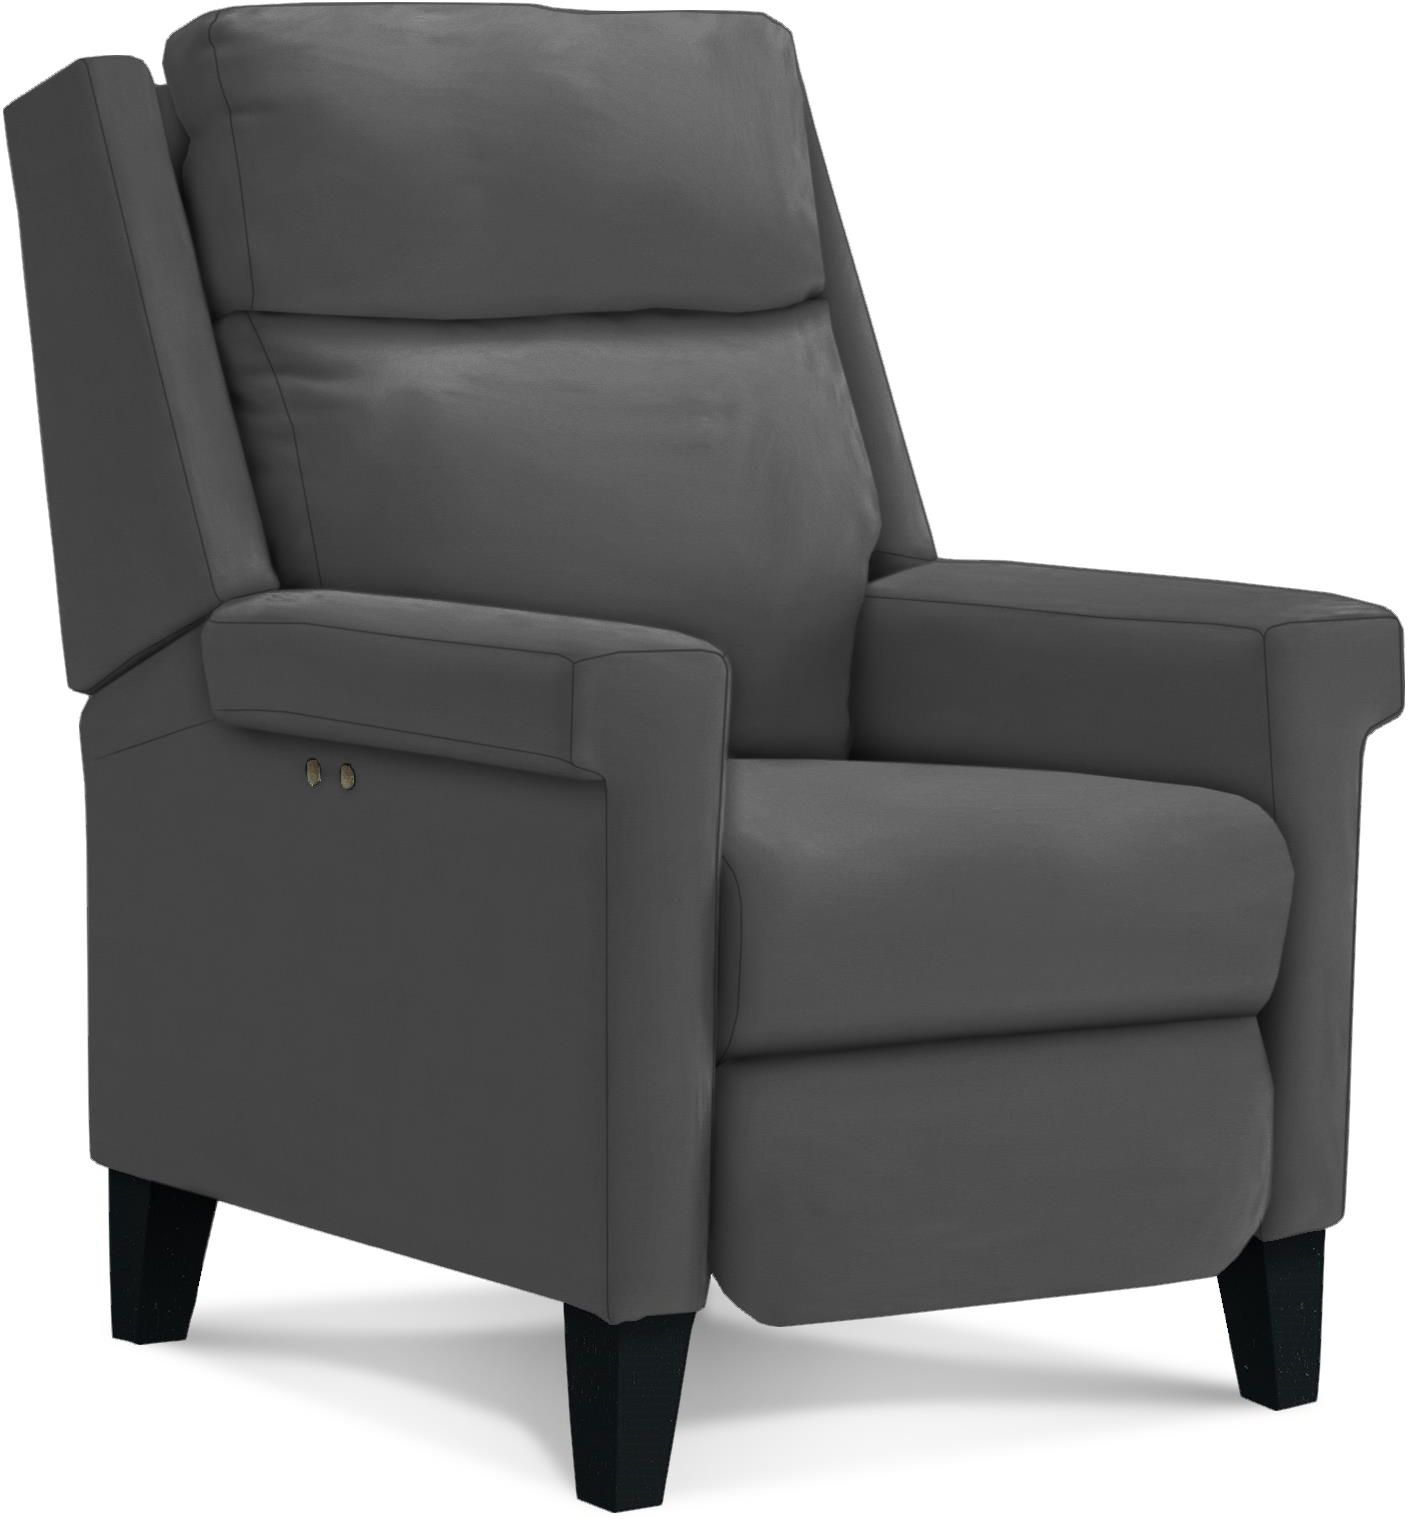 Best® Home Furnishings Prima Antique Black Leather Power Recliner